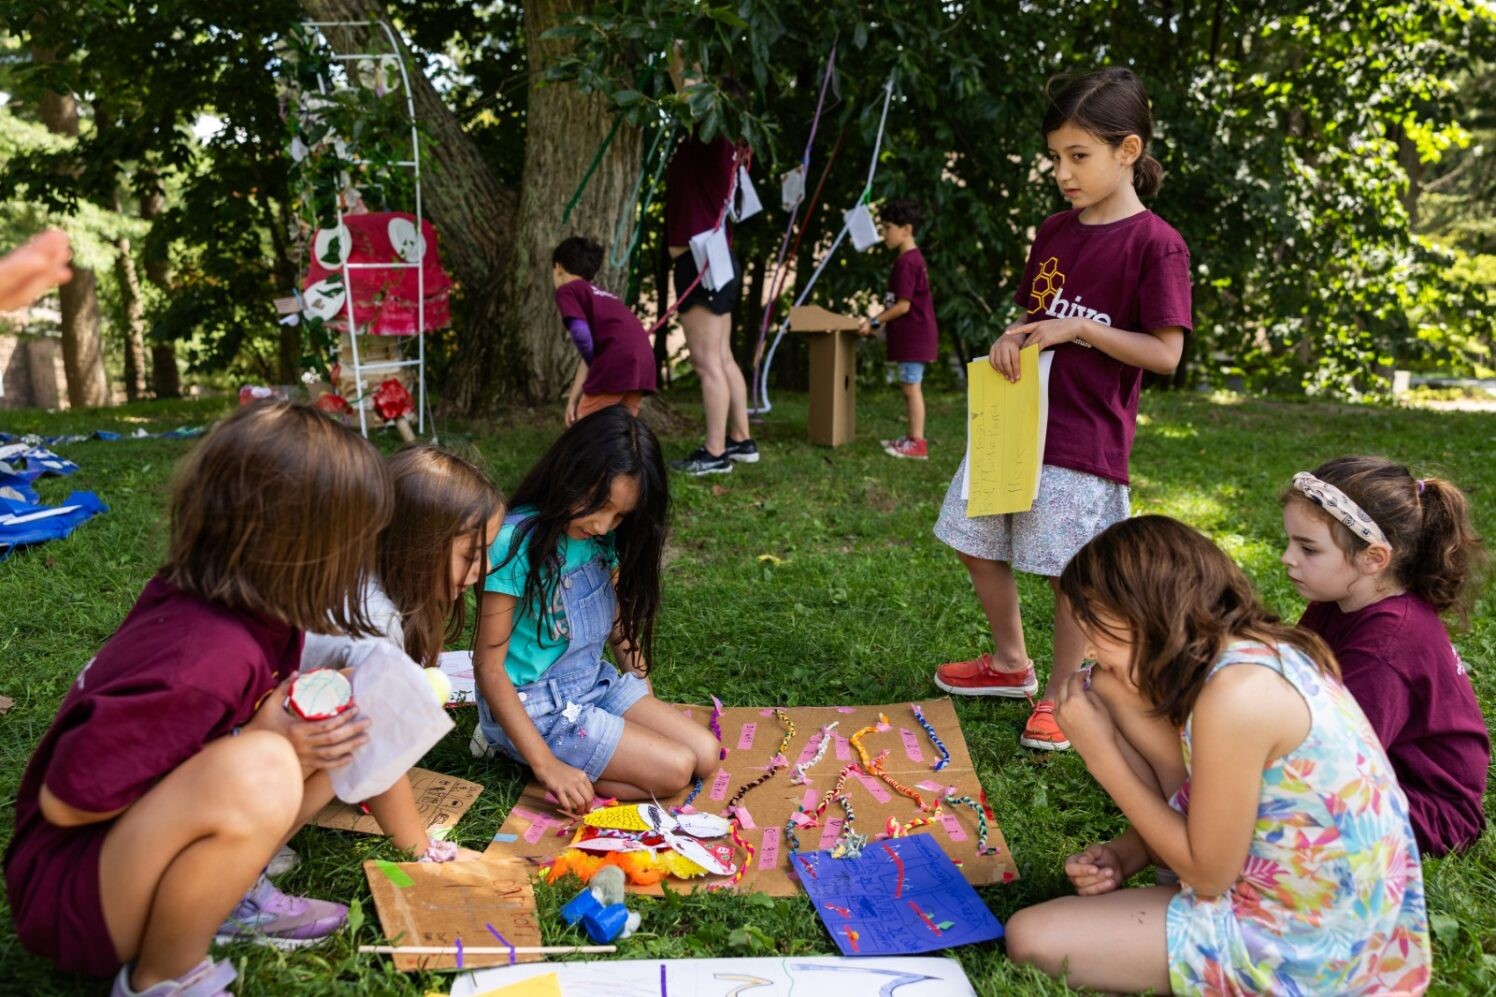 Children paint a canvas laid on the grass